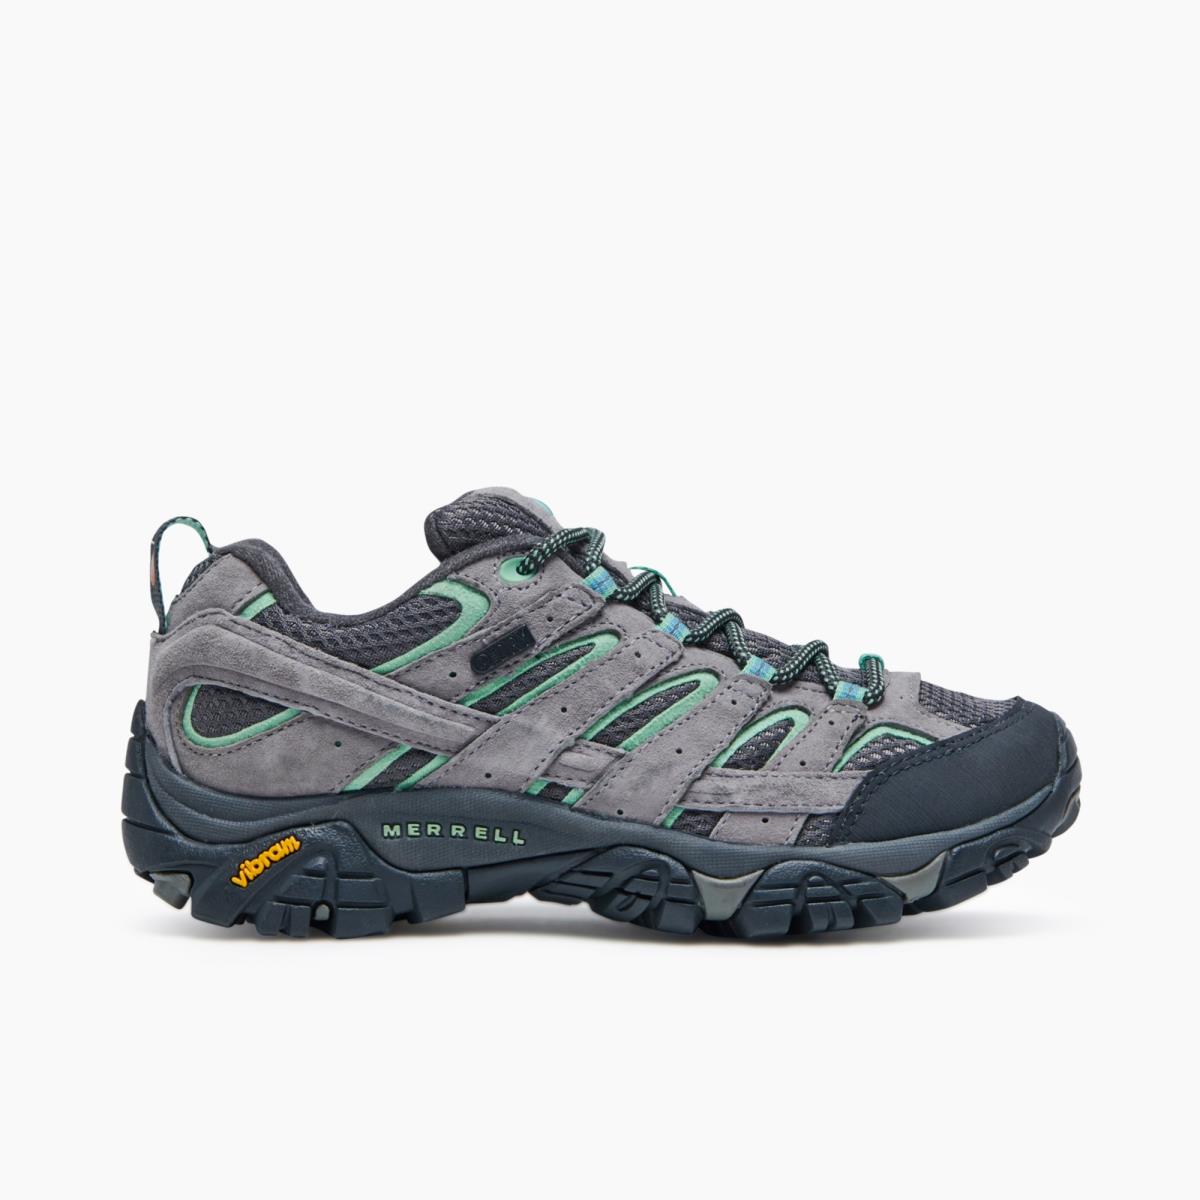 Merrell Women Moab 2 Waterproof Wide Width Hiking Shoes Suede Leather-and-mesh Drizzle/Mint